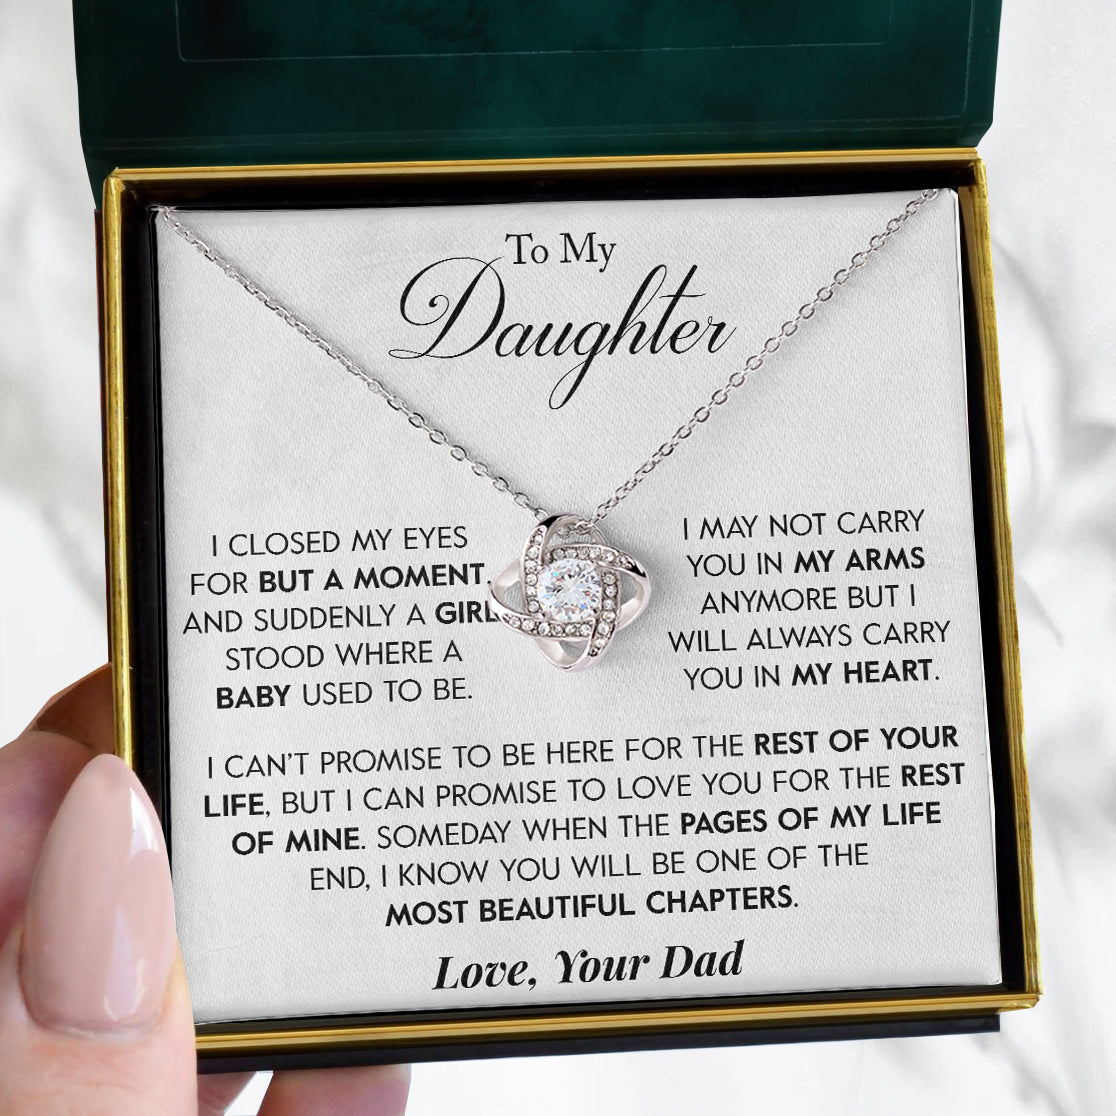 To My Daughter | "Carry You in my Heart" | Love Knot Necklace